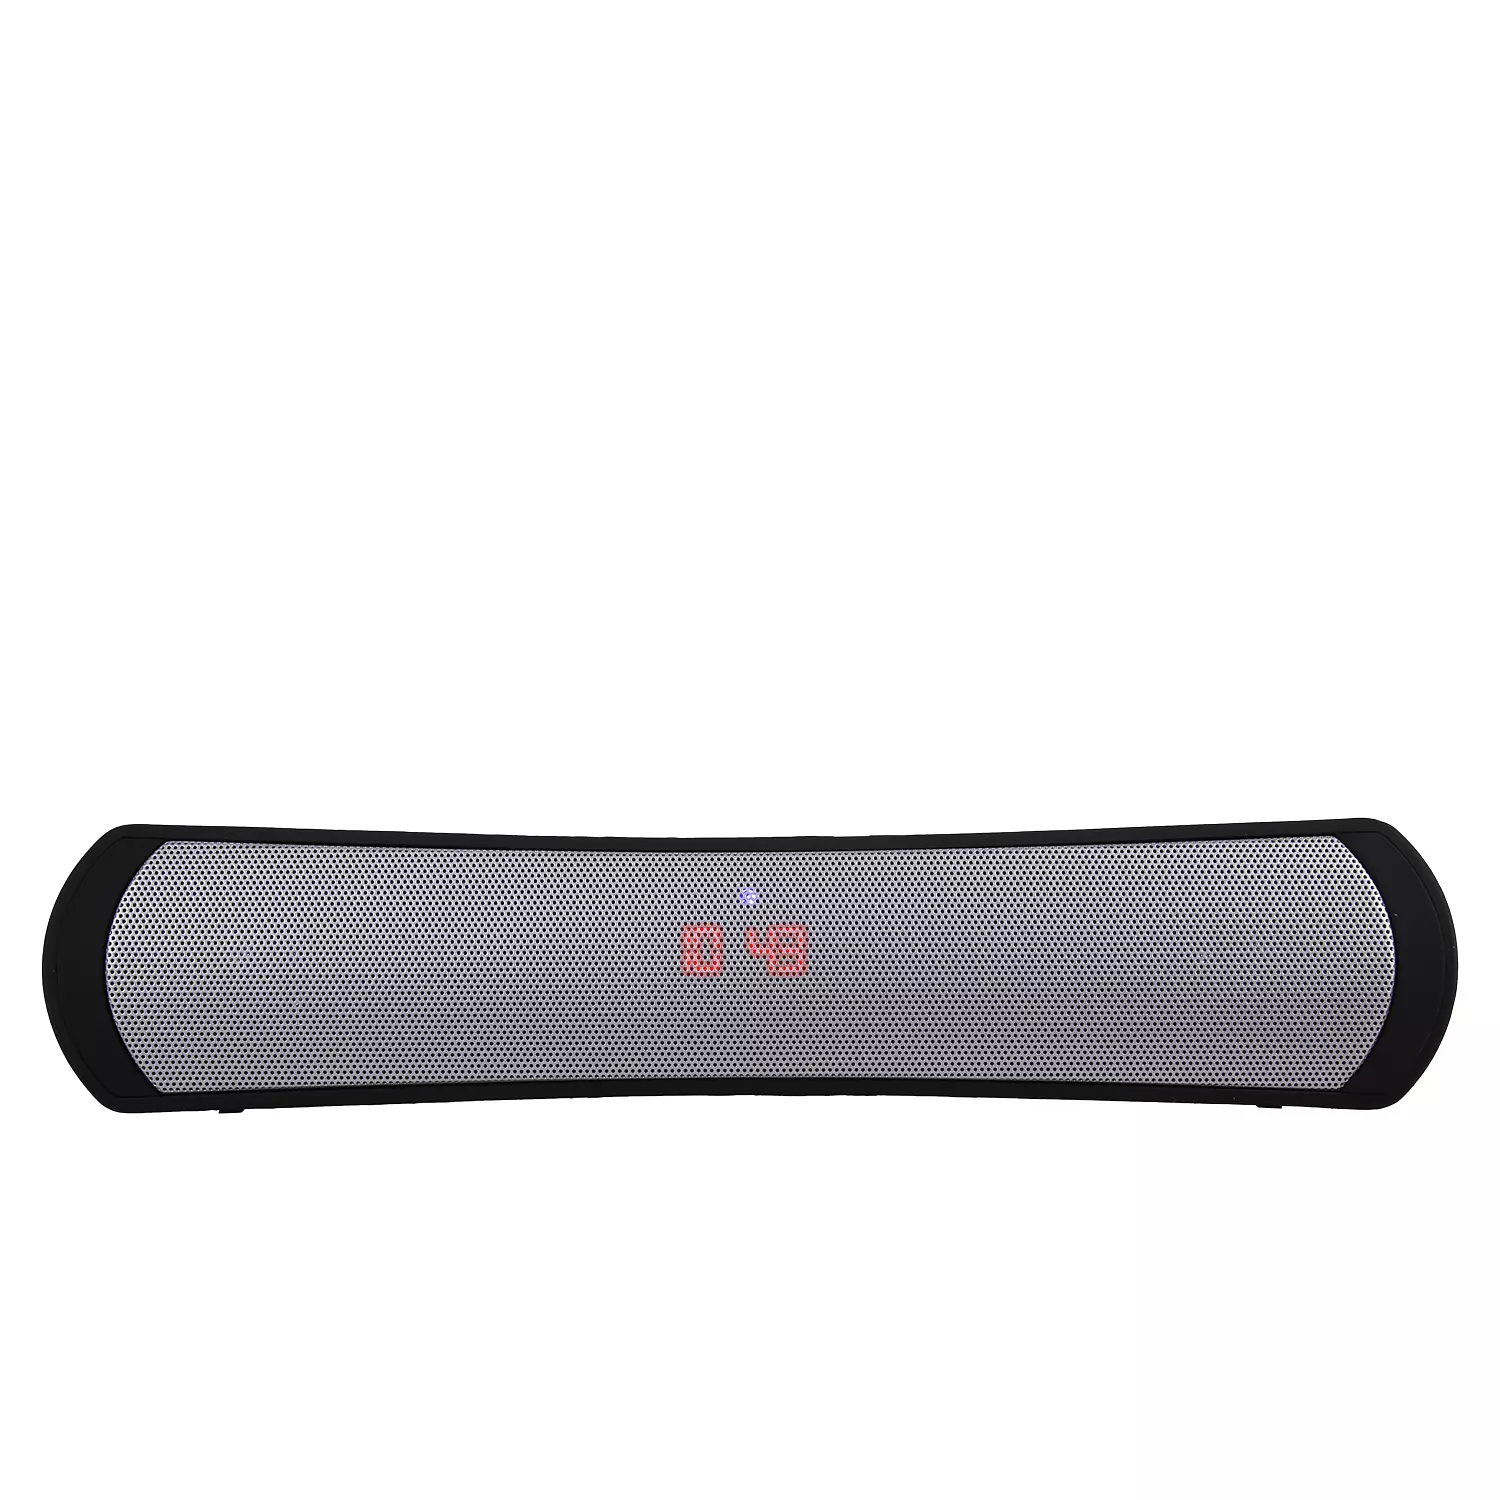 Escape - Hands free wireless stereo speaker with FM radio